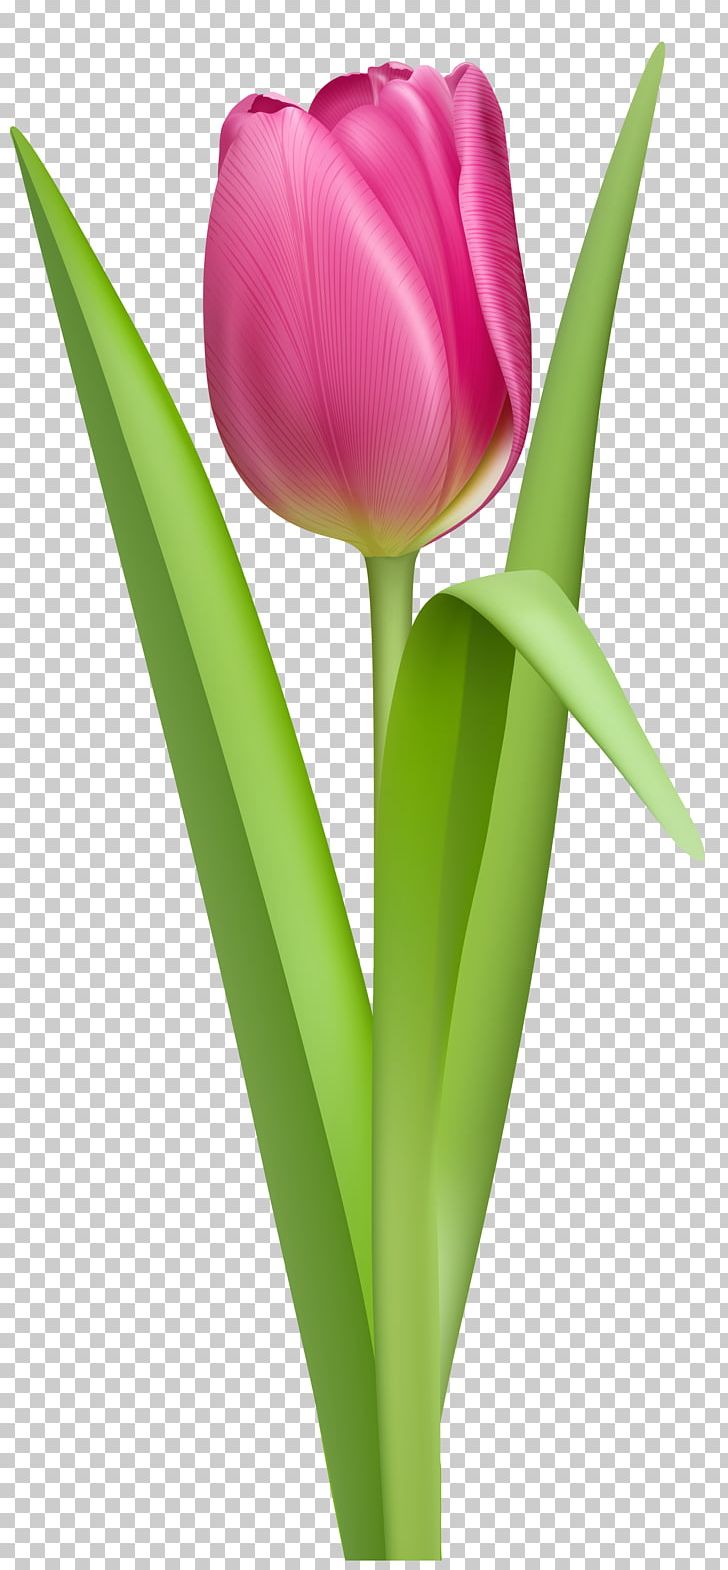 The Tulip: The Story Of A Flower That Has Made Men Mad PNG, Clipart, Bud, Cut Flowers, Desktop Wallpaper, Digital Image, Flower Free PNG Download